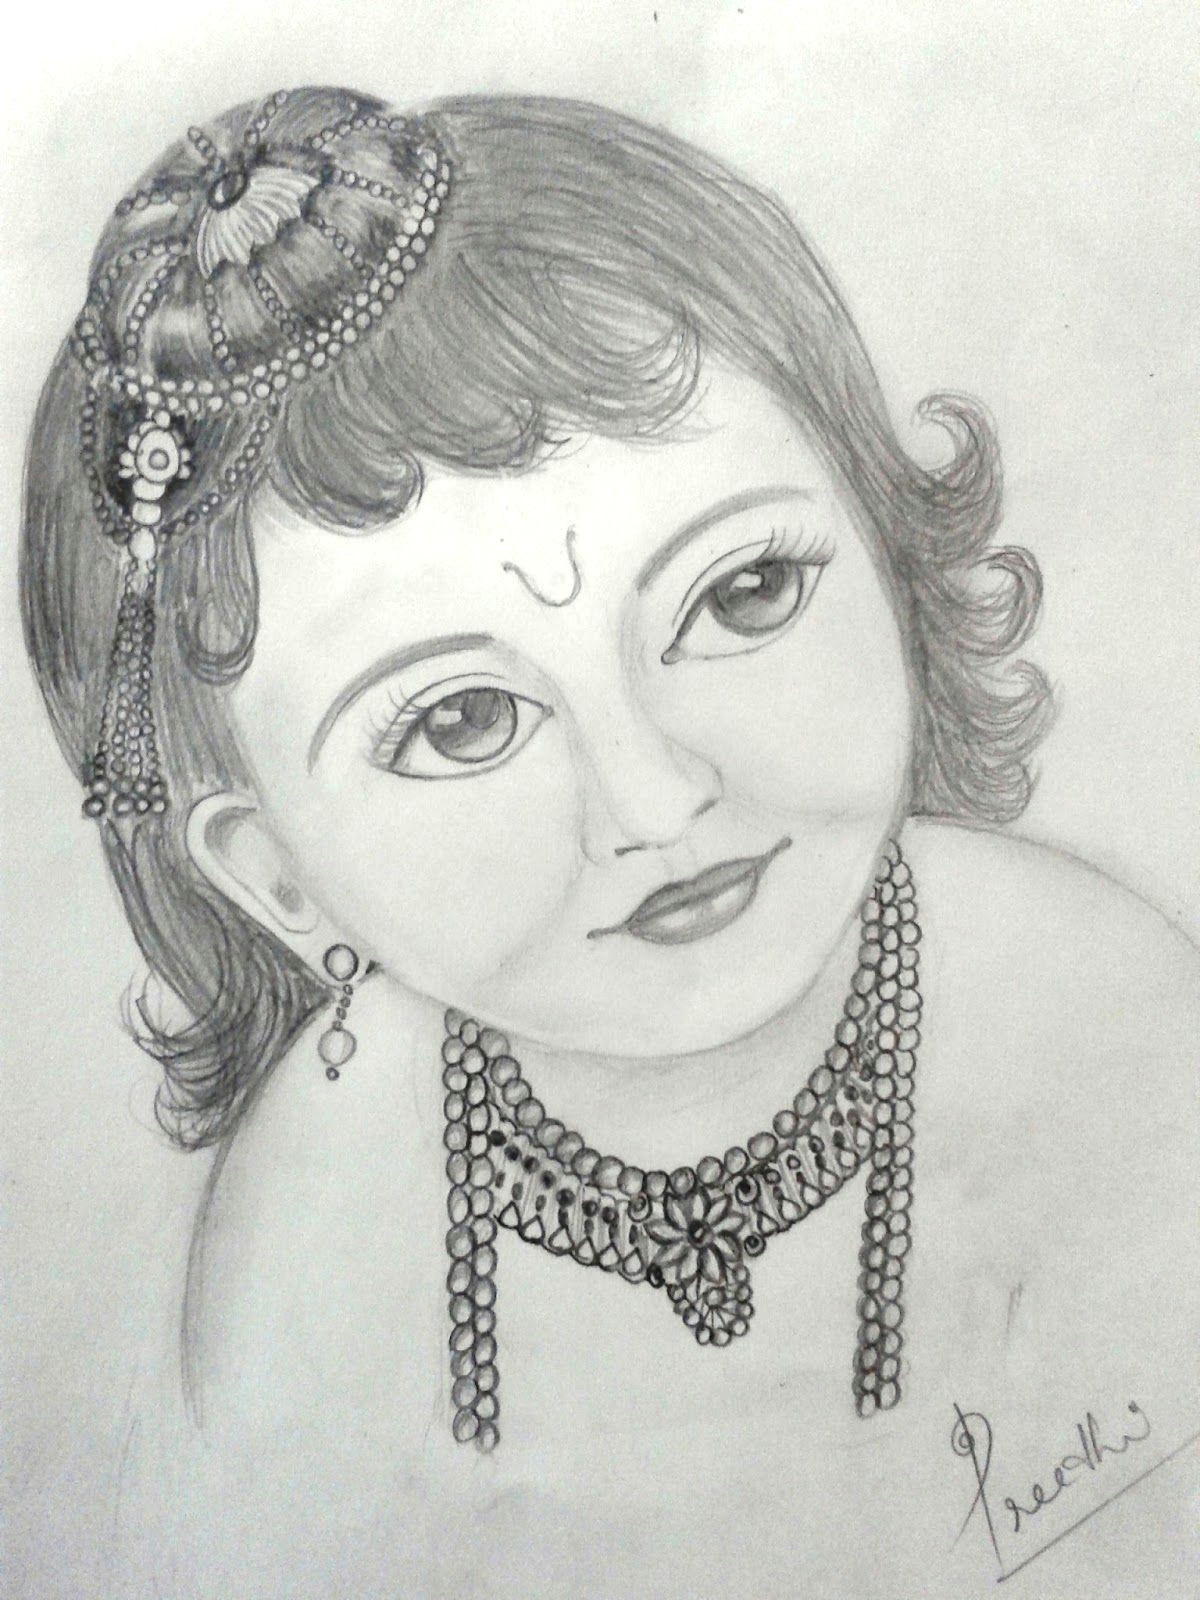 Easy Drawings Of Virat Kohli Easy Pencil Drawings Of Faces A Pencil Sketch Of Little Krishna